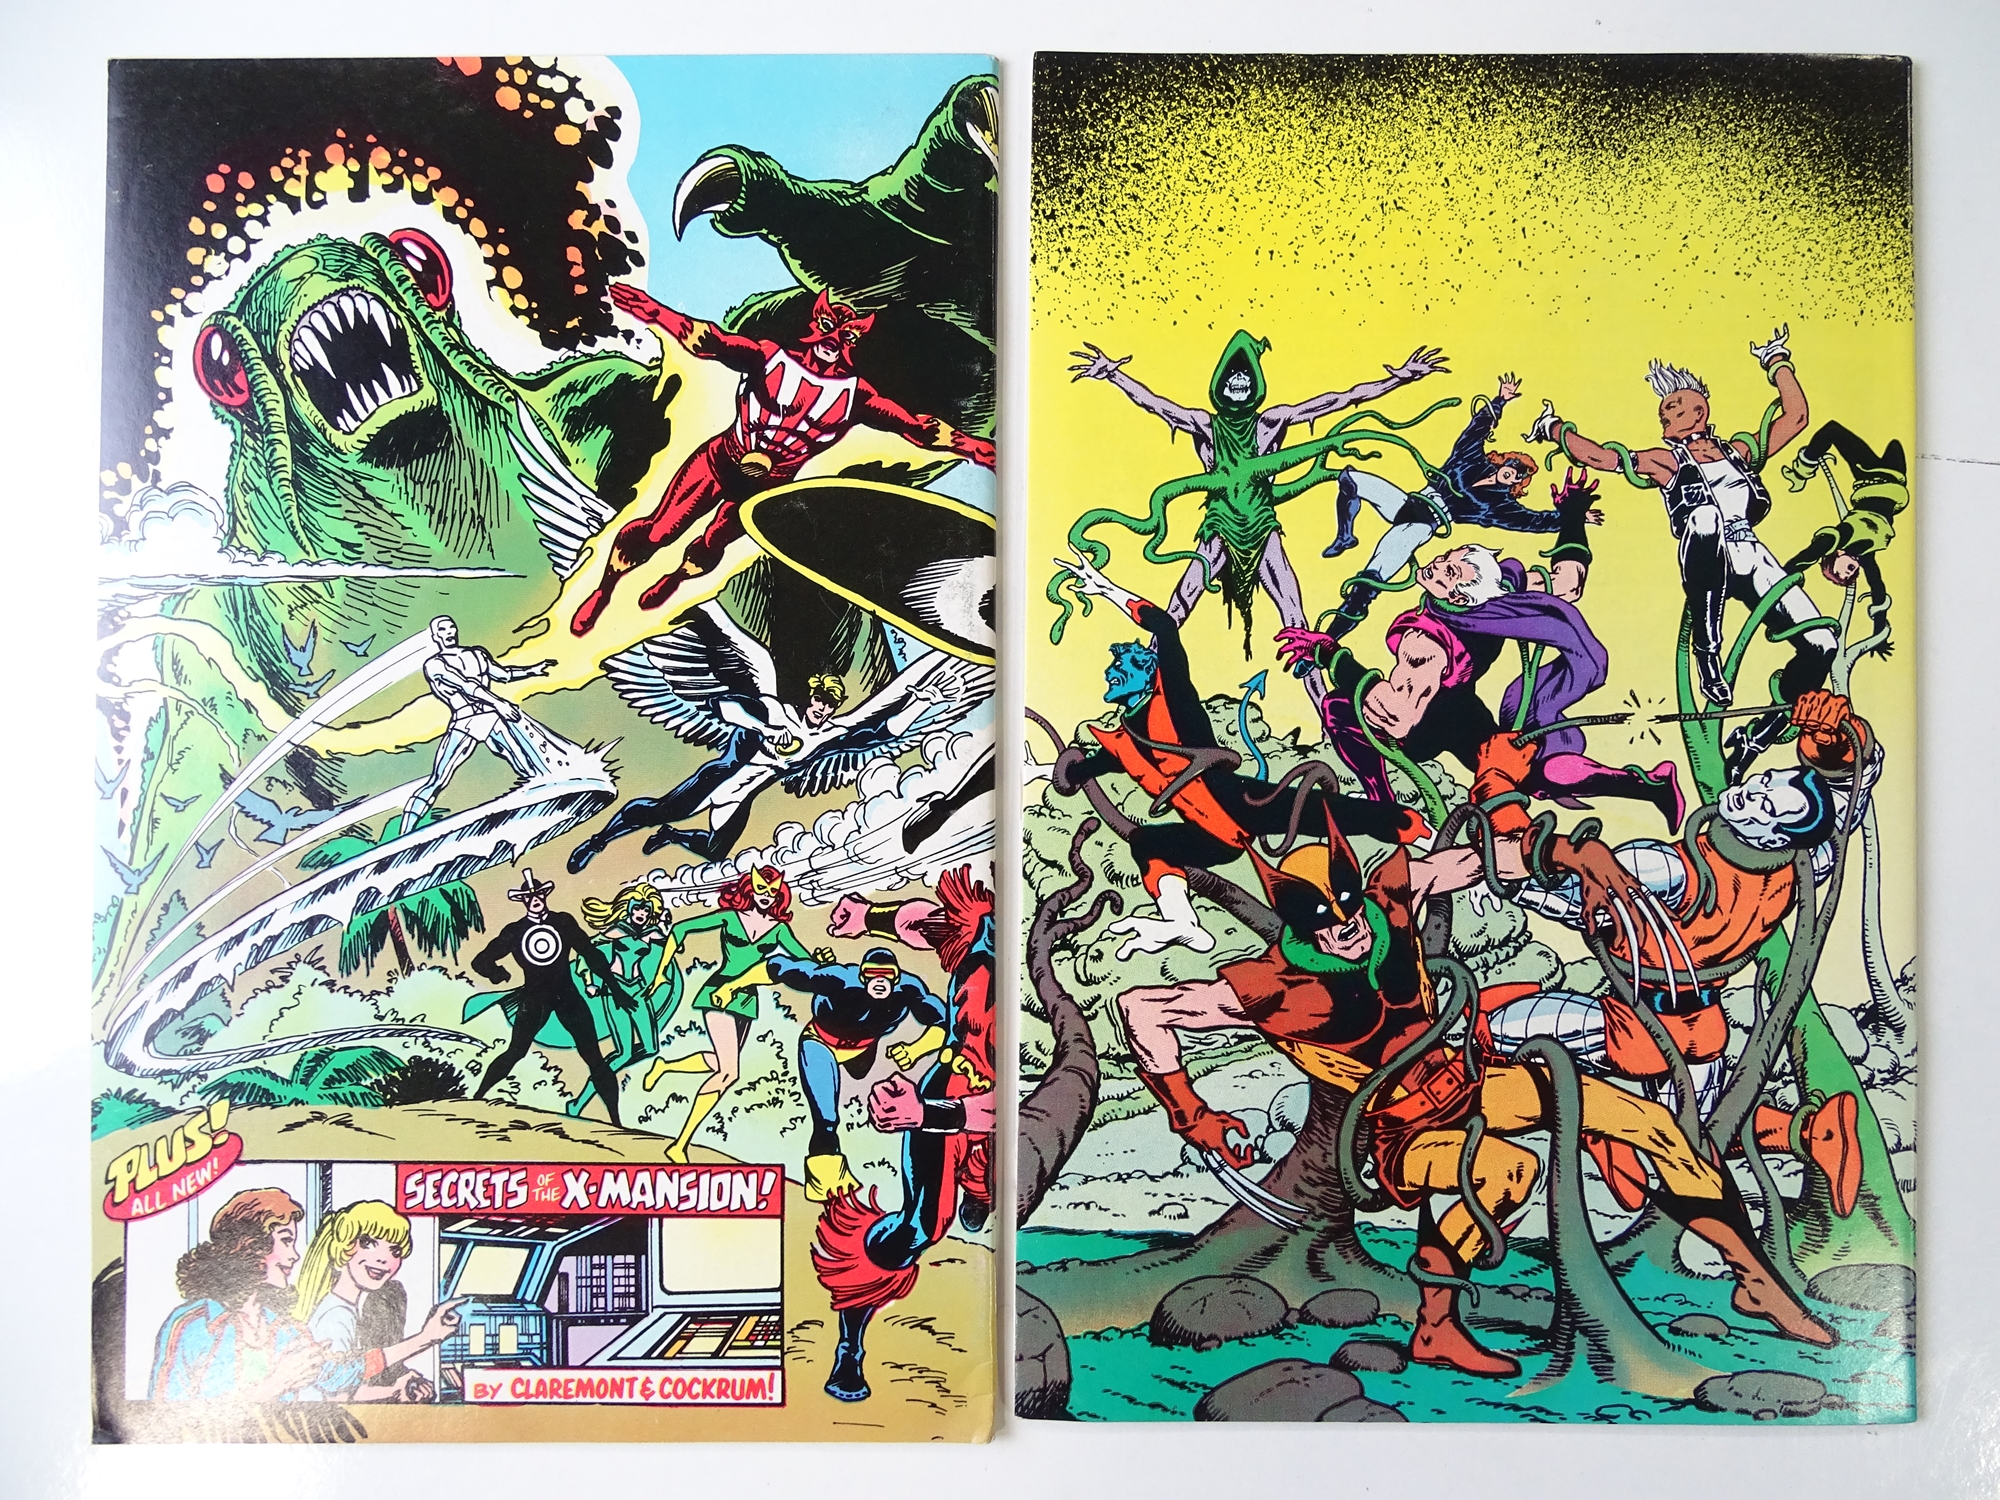 X-MEN - SPECIAL EDITION #1 & HEROES FOR HOPE #1 (2 in Lot) - (1983/85 - MARVEL) - Flat/Unfolded - - Image 2 of 2